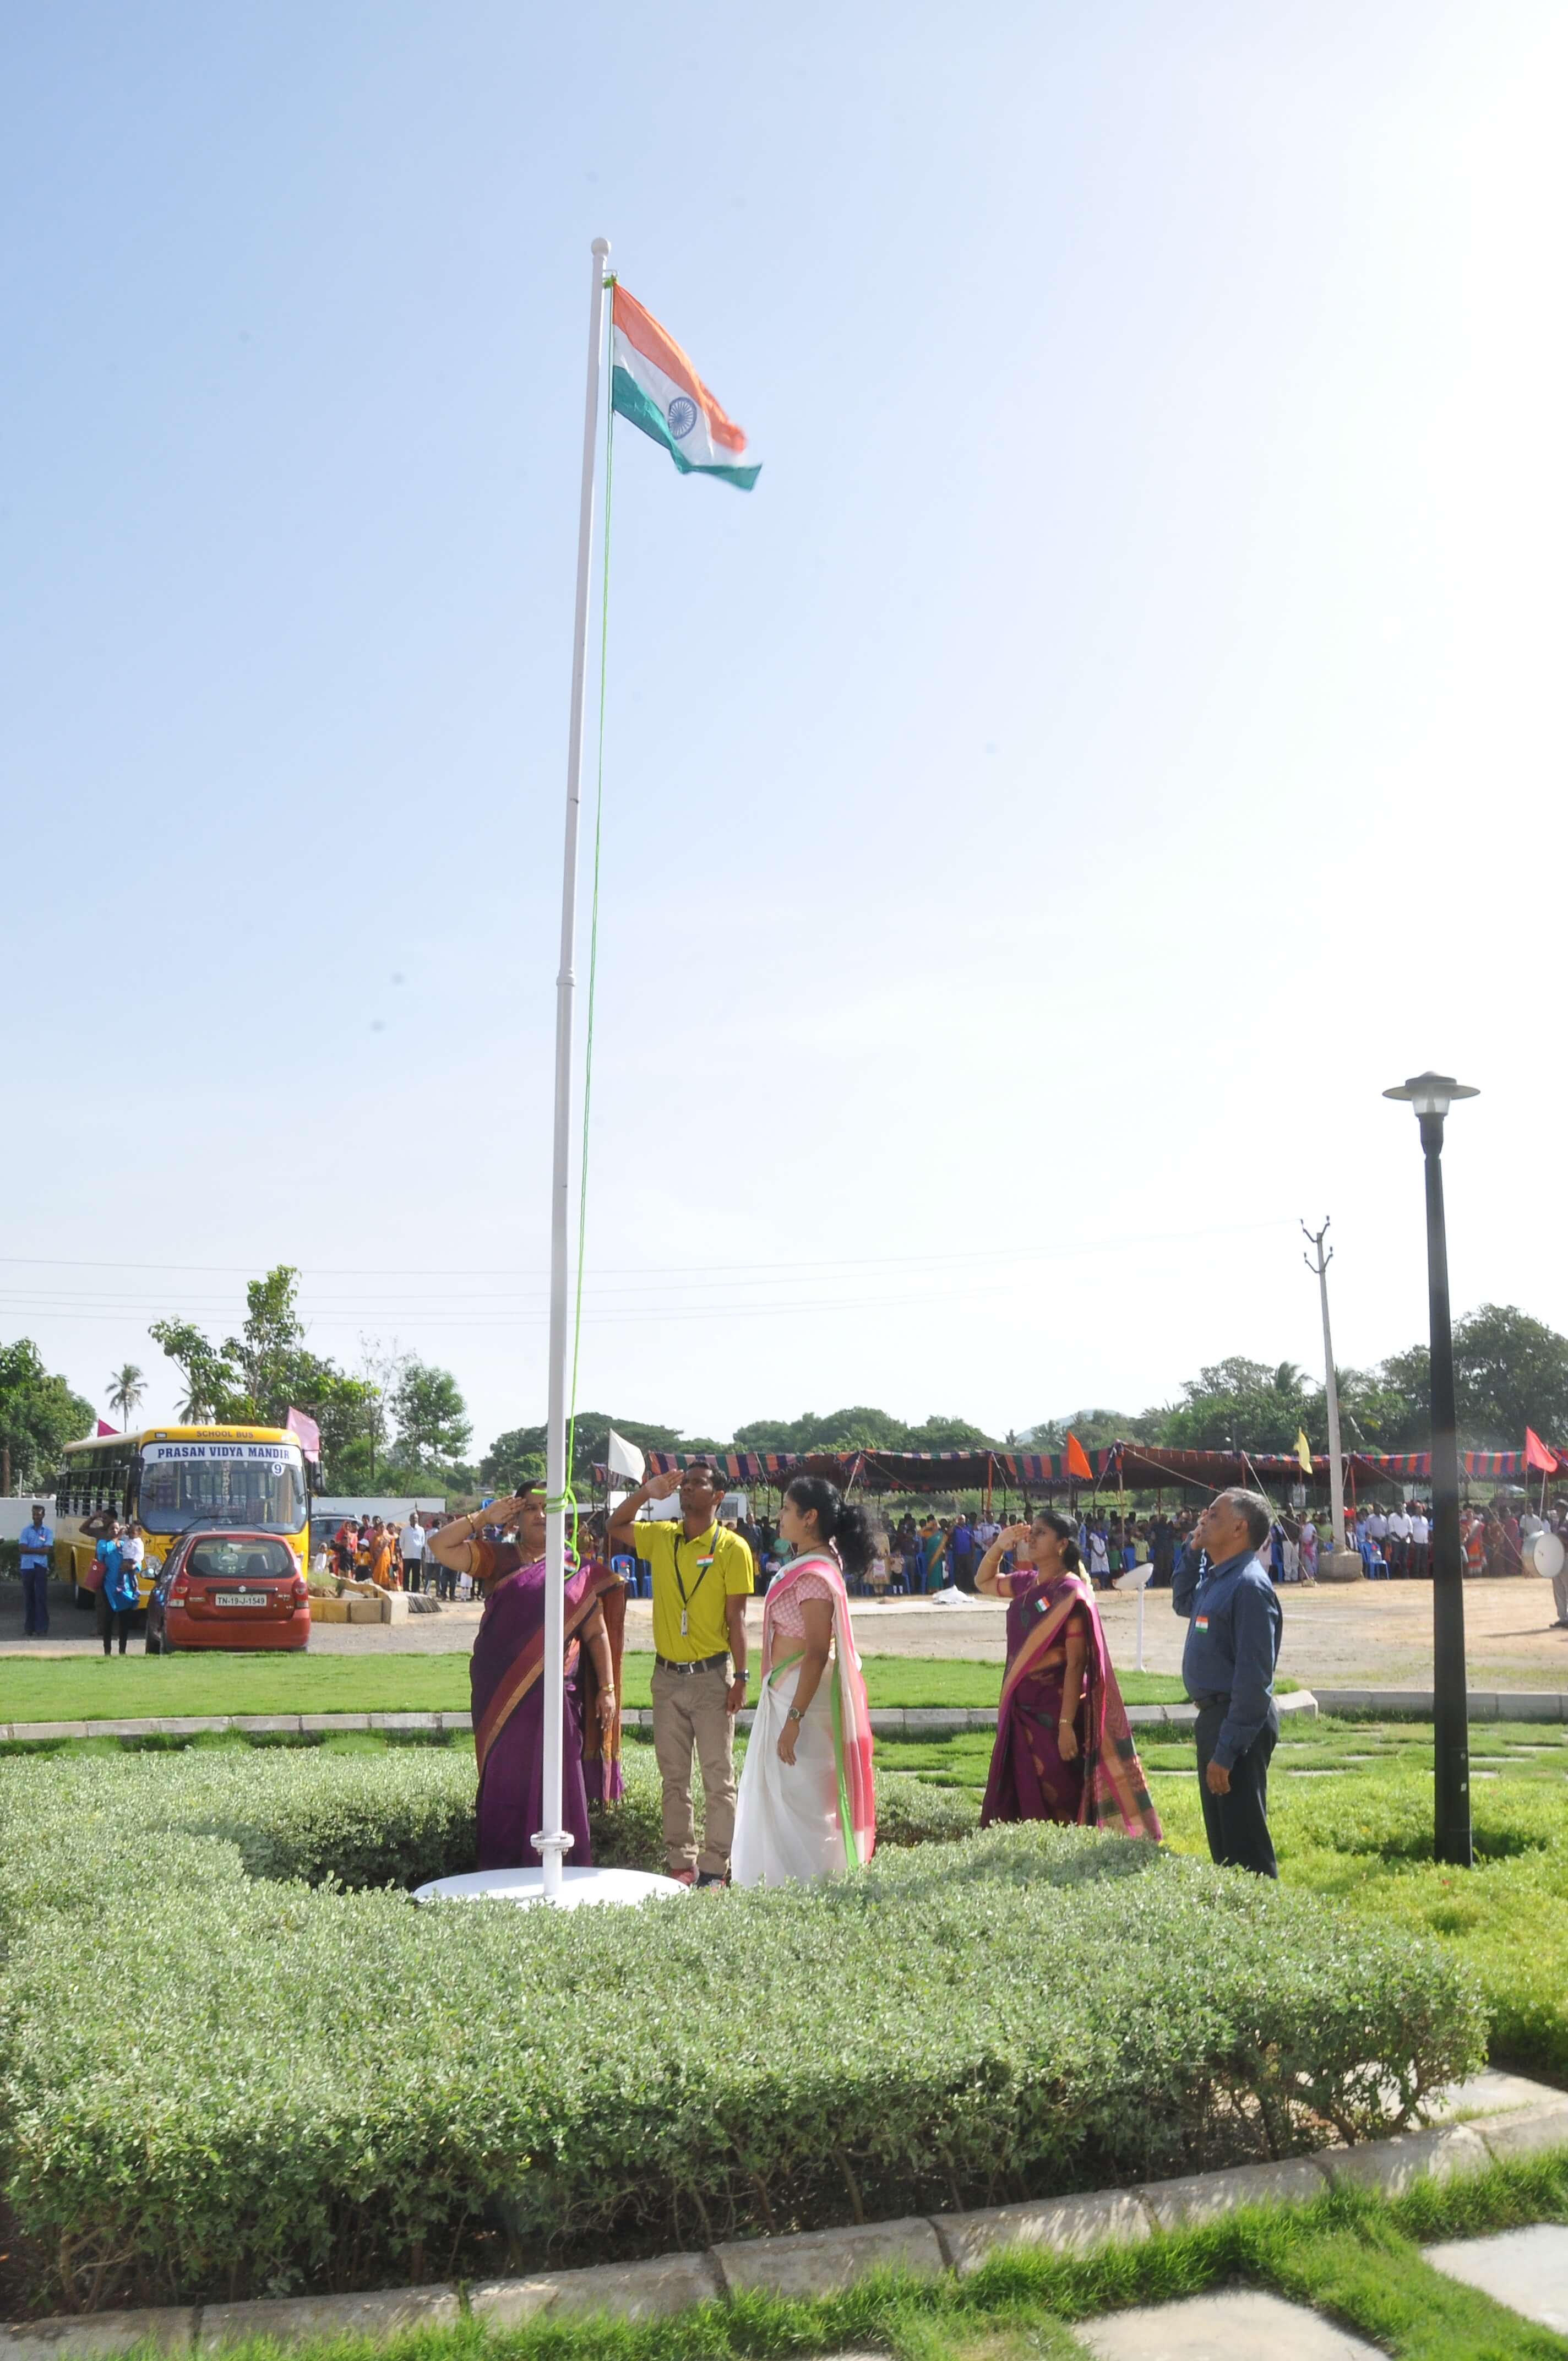 Proudly hoisting our National flag